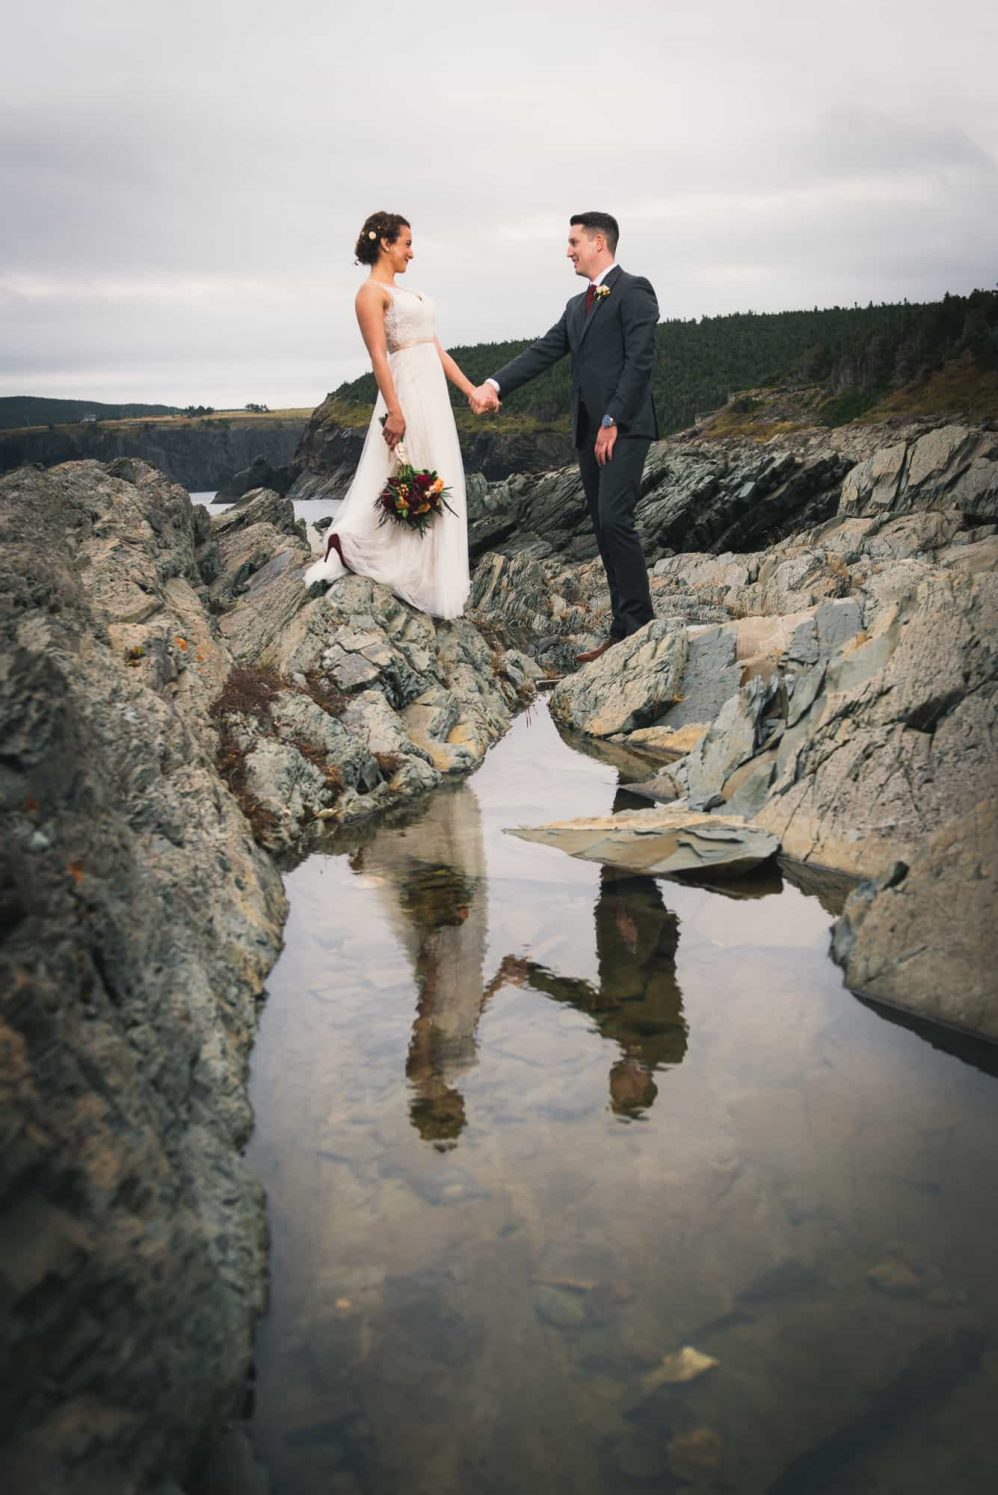 An image of the bride and groom holding hands is reflected via a foreground puddle.